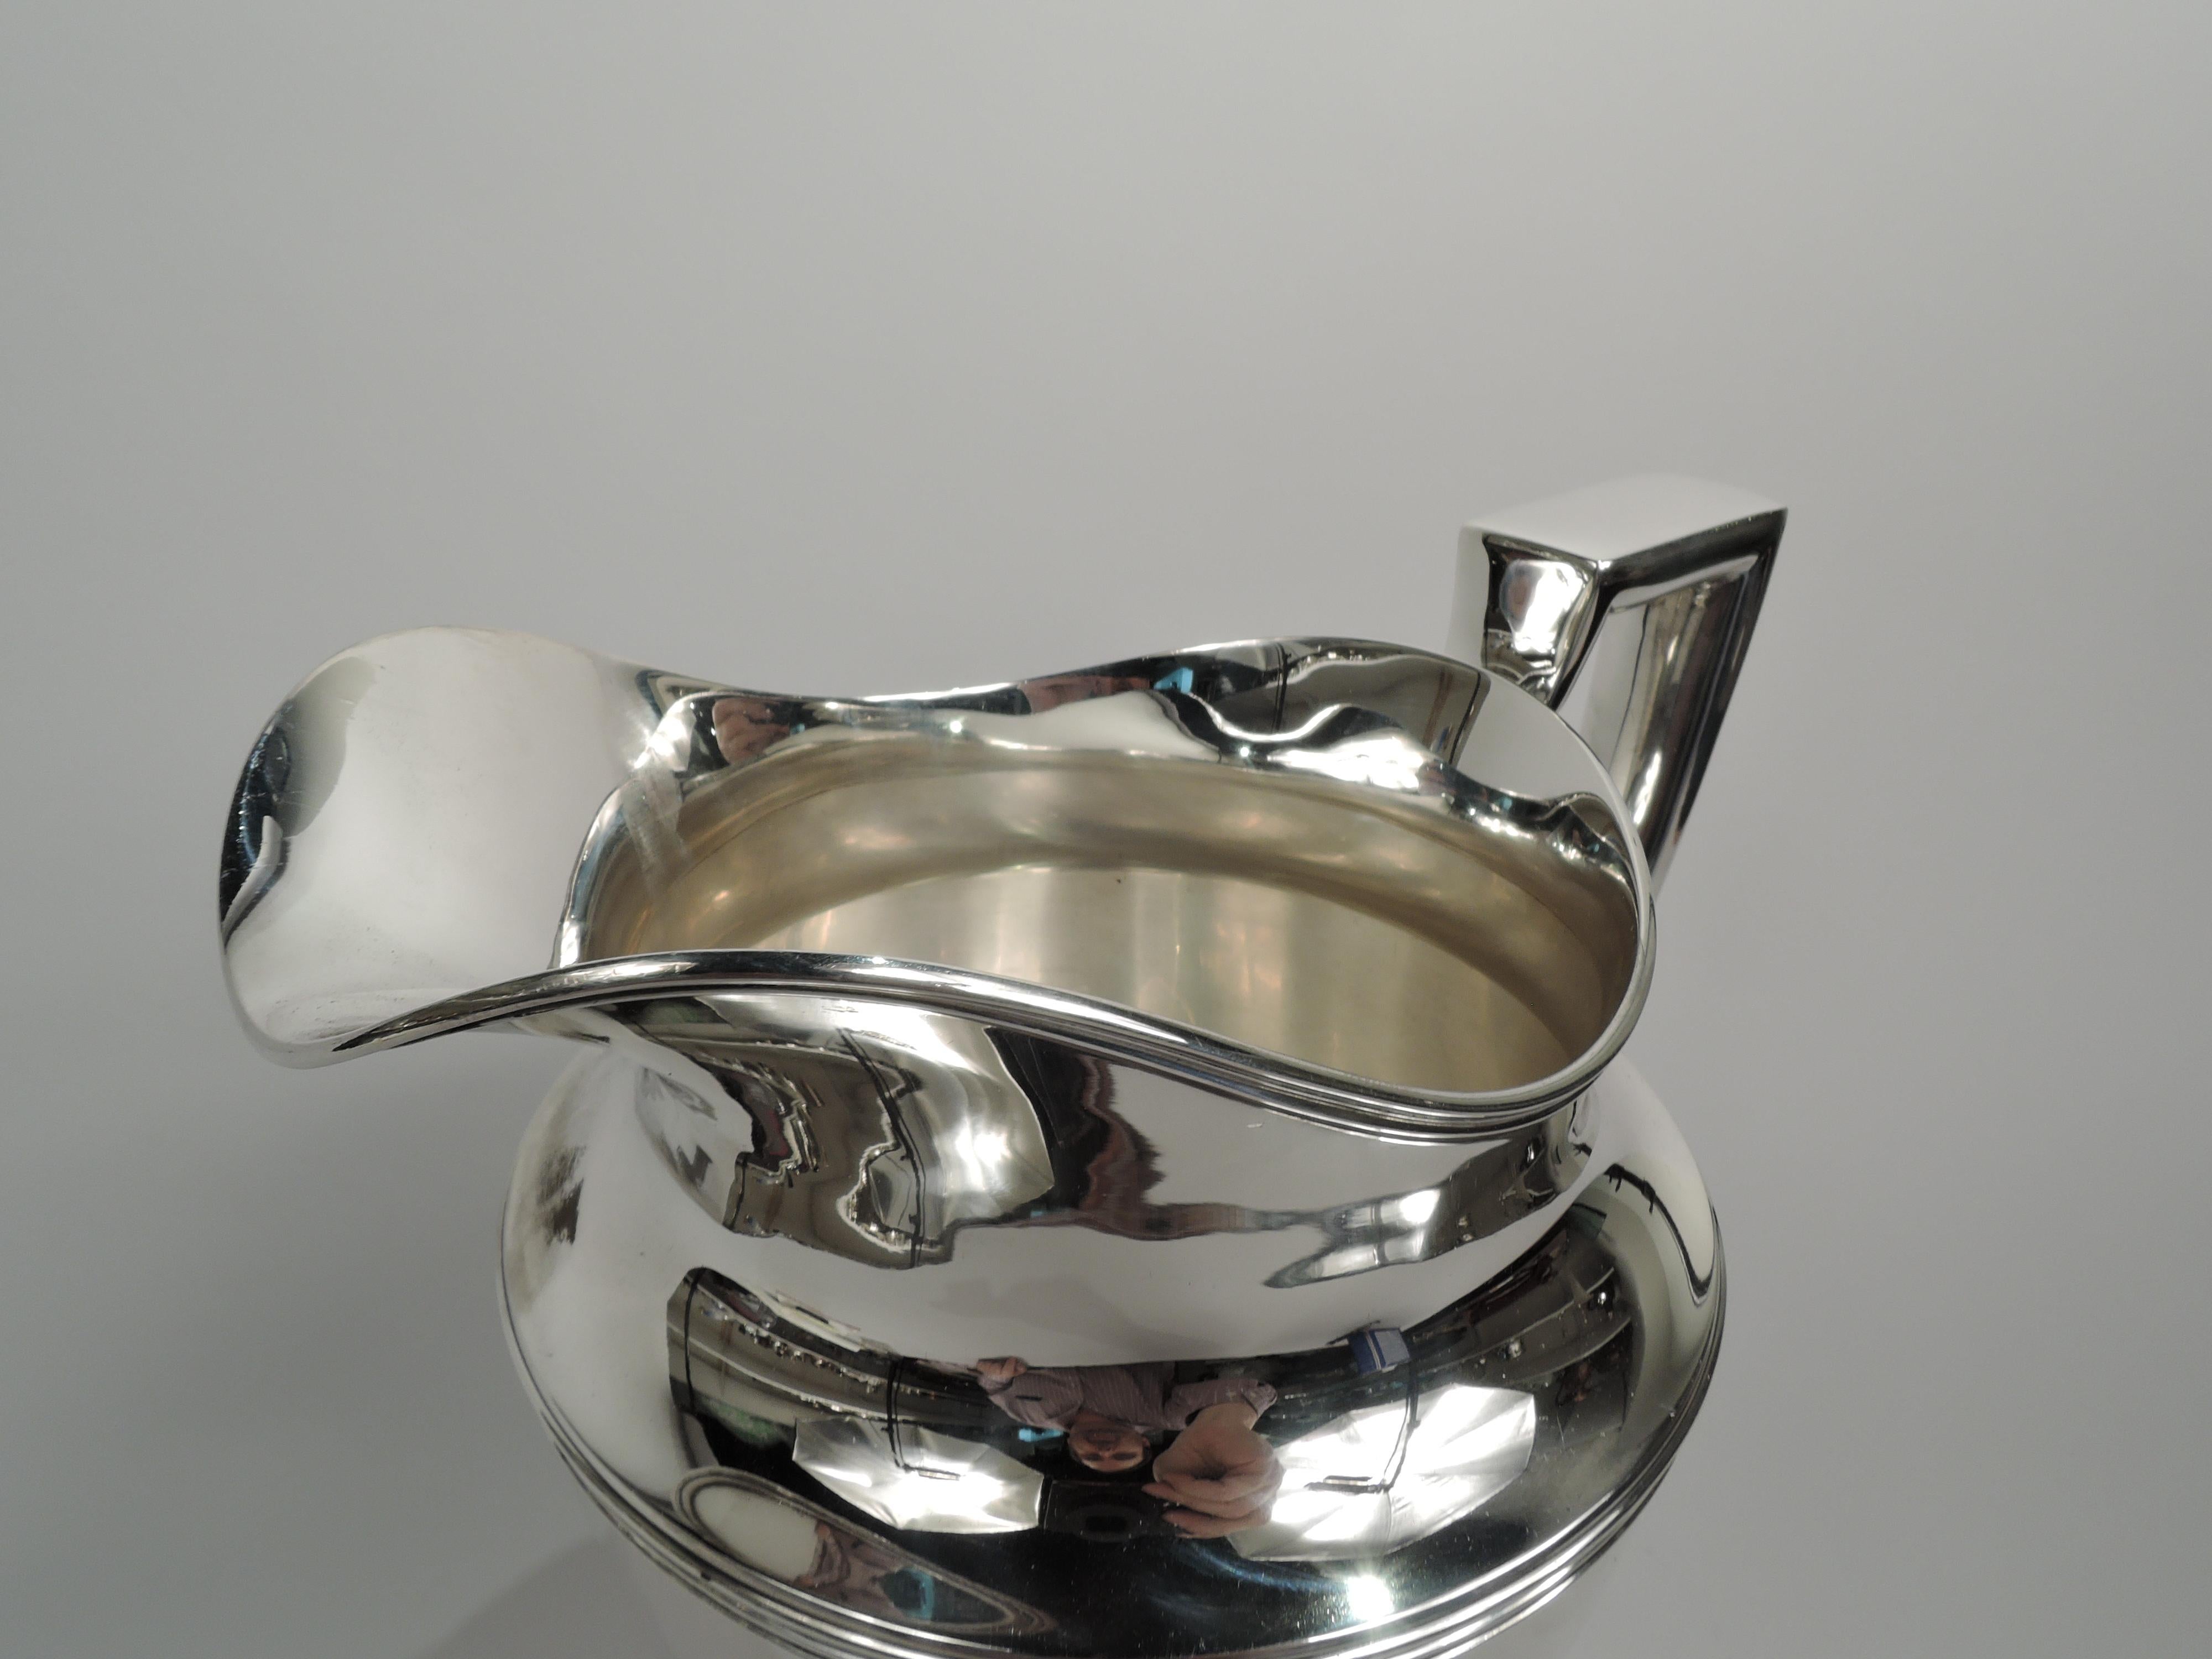 Classic sterling silver water pitcher. Made by Tiffany & Co. in New York, ca 1911. Curved and tapering body, raised foot, scrolled bracket handle, and helmet mouth. Reeding. Fully marked including maker’s stamp, pattern no. 18181 (first produced in